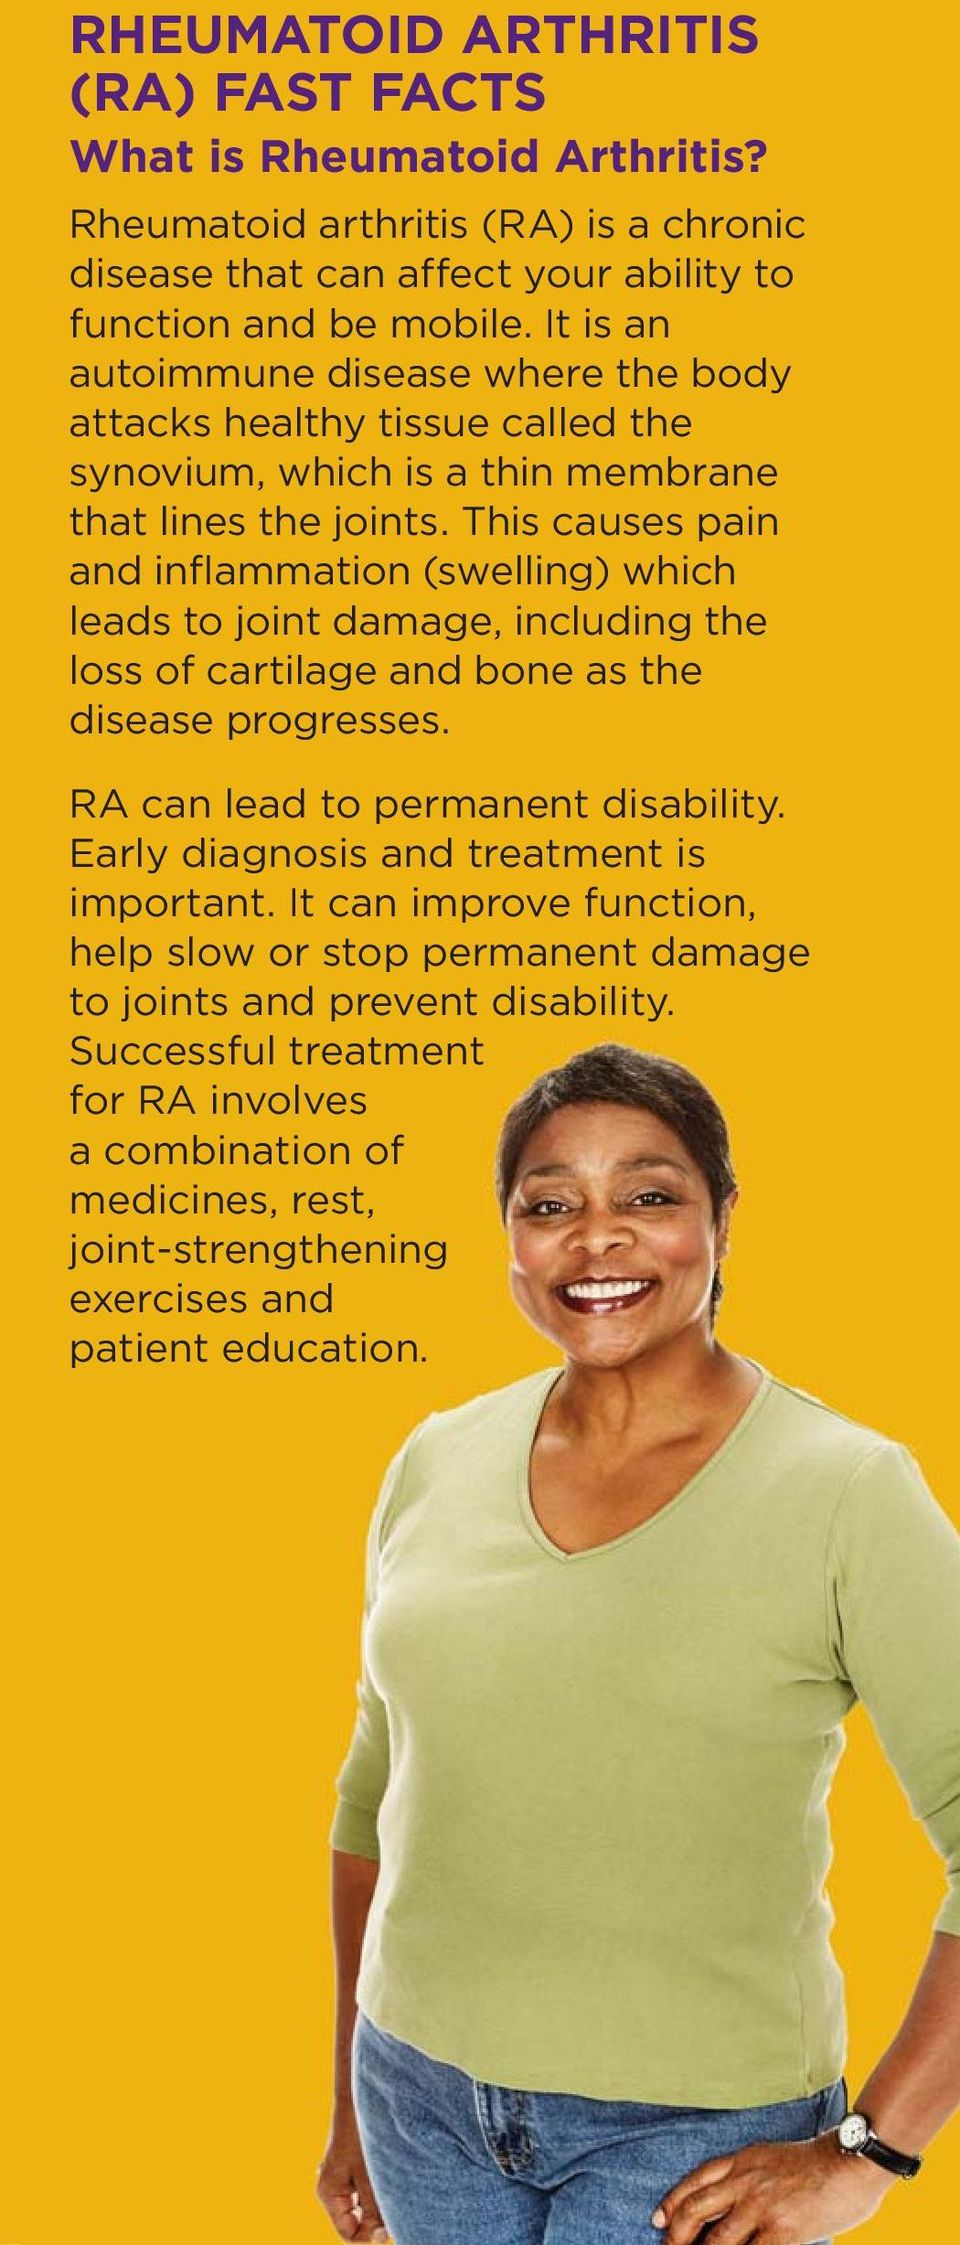 This causes pain and inflammation (swelling) which leads to joint damage, including the loss of cartilage and bone as the disease progresses. RA can lead to permanent disability.